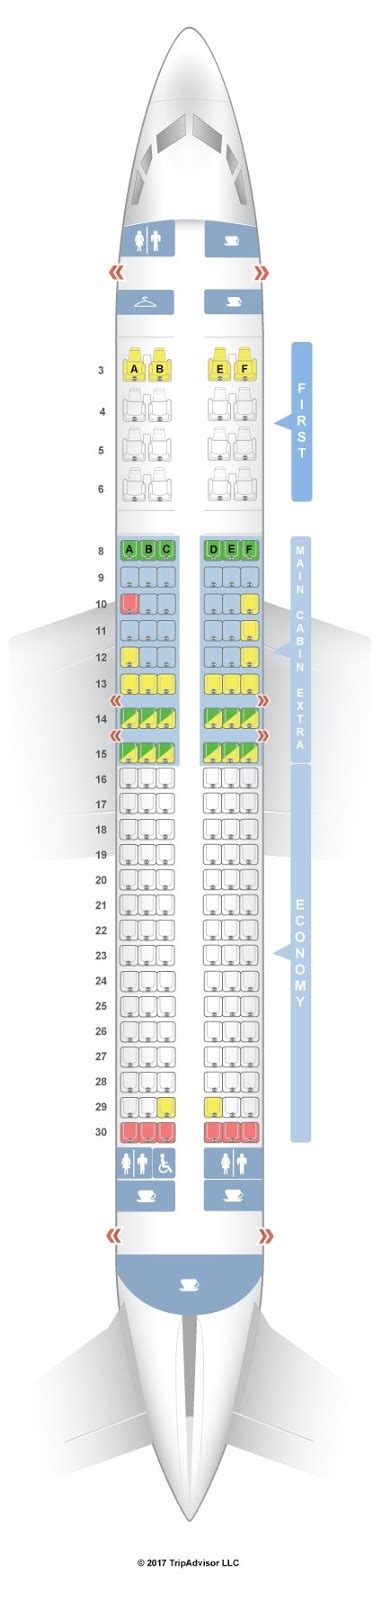 Boeing 737 800 seating chart american airlines. Overview. This aircraft has a configuration of 16 First Class seats, 54 Economy Plus seats, and 96 Economy Class seats. United's B737-800 aircraft serve routes within North America. This version features United's current Economy Plus class of service featuring up to 5" of extra seat pitch. 